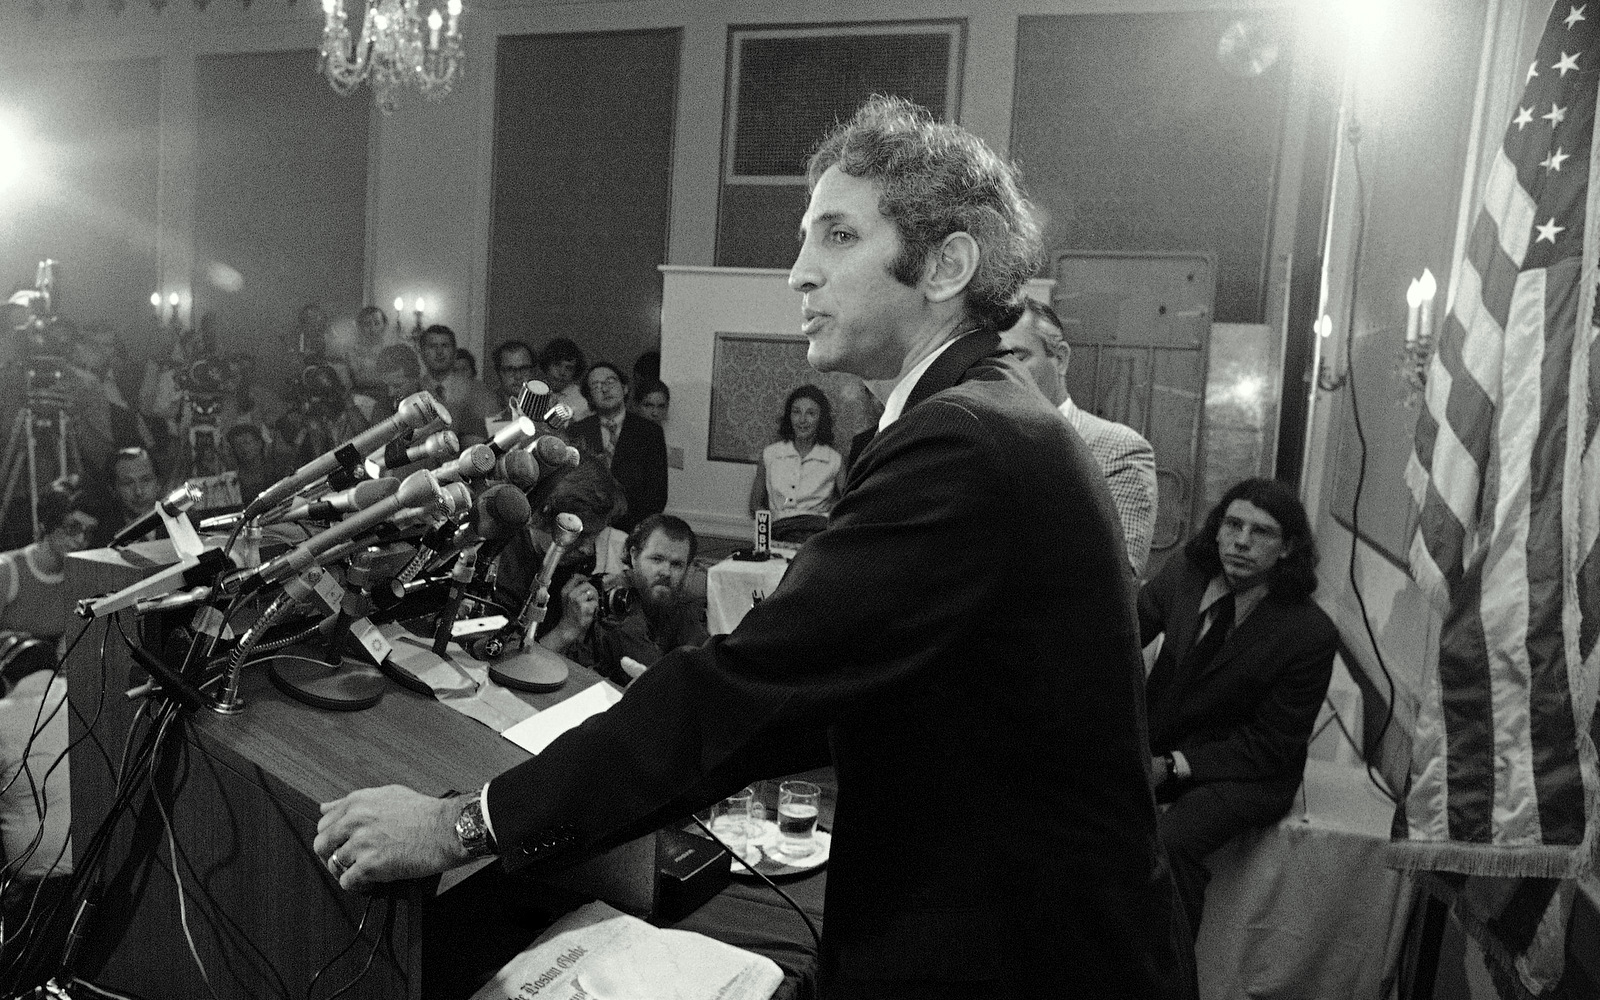 Dr. Daniel Ellsberg faces a battery of microphones at a news conference in Cambridge on Thursday, July 1, 1971. Ellsberg charged that government secrecy has led to the deaths of 50,000 Americans in Vietnam. (AP Photo)